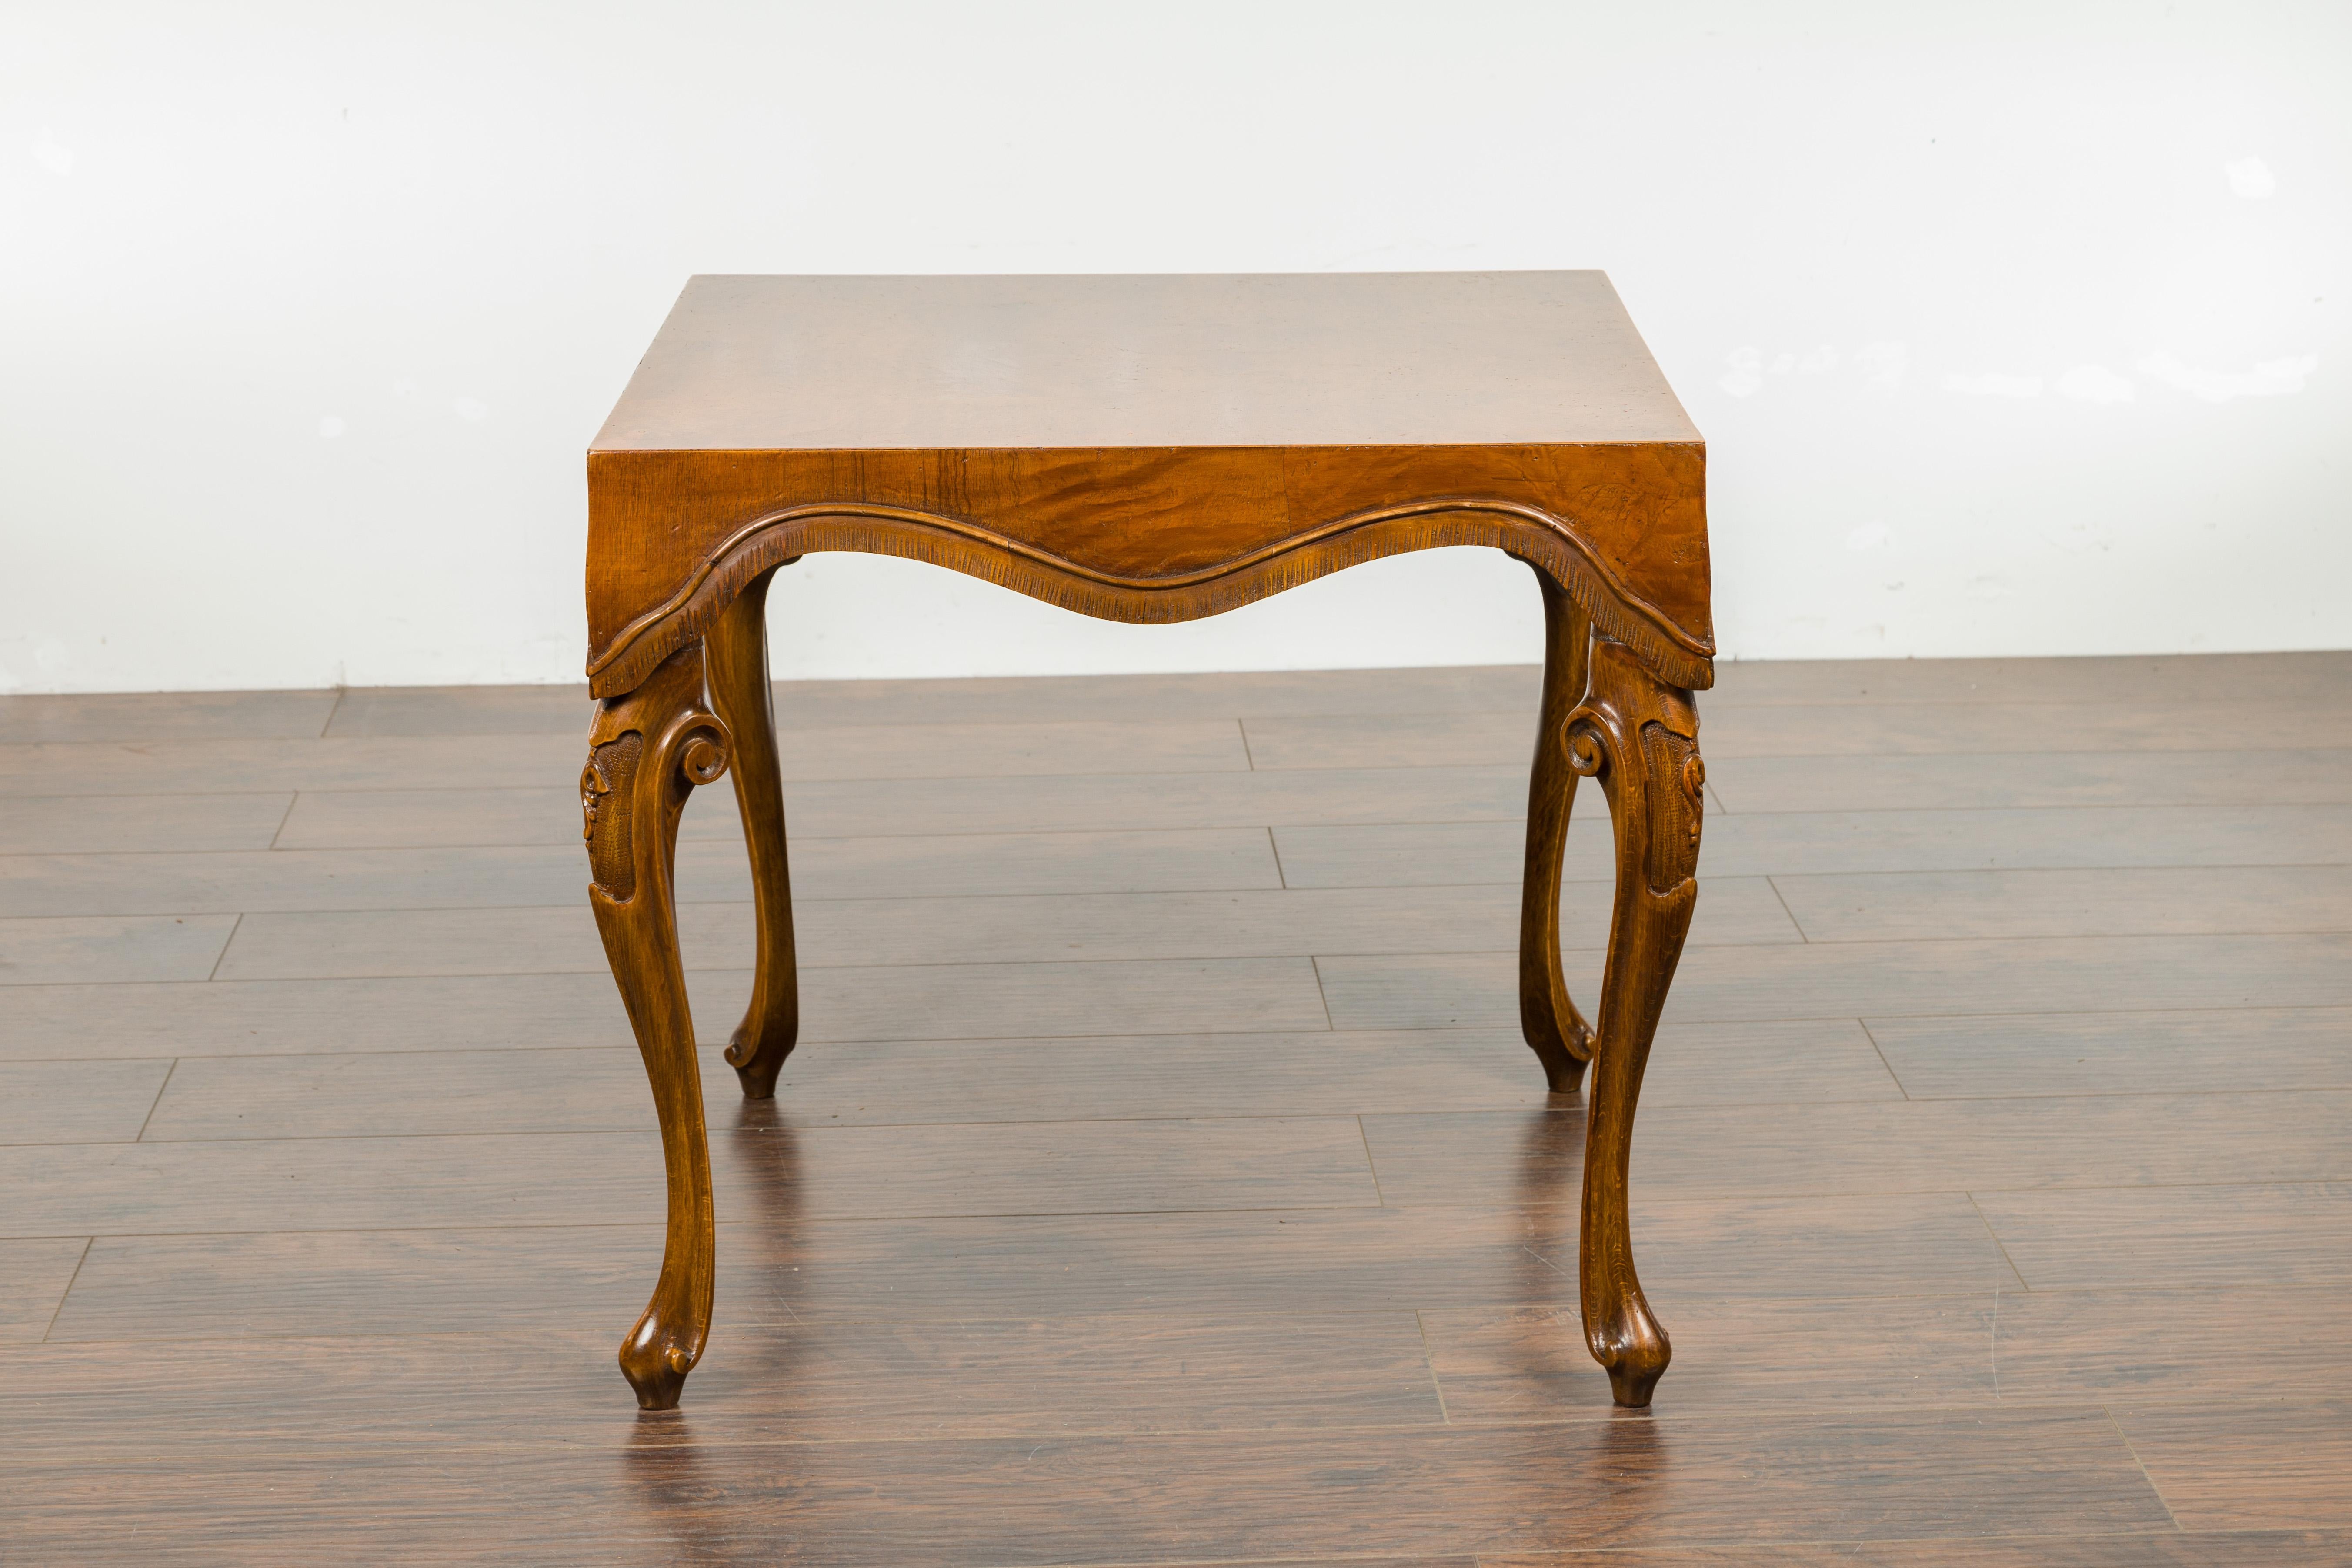 Italian Rococo Style Midcentury Walnut and Olive Wood Table with Cabriole Legs For Sale 5